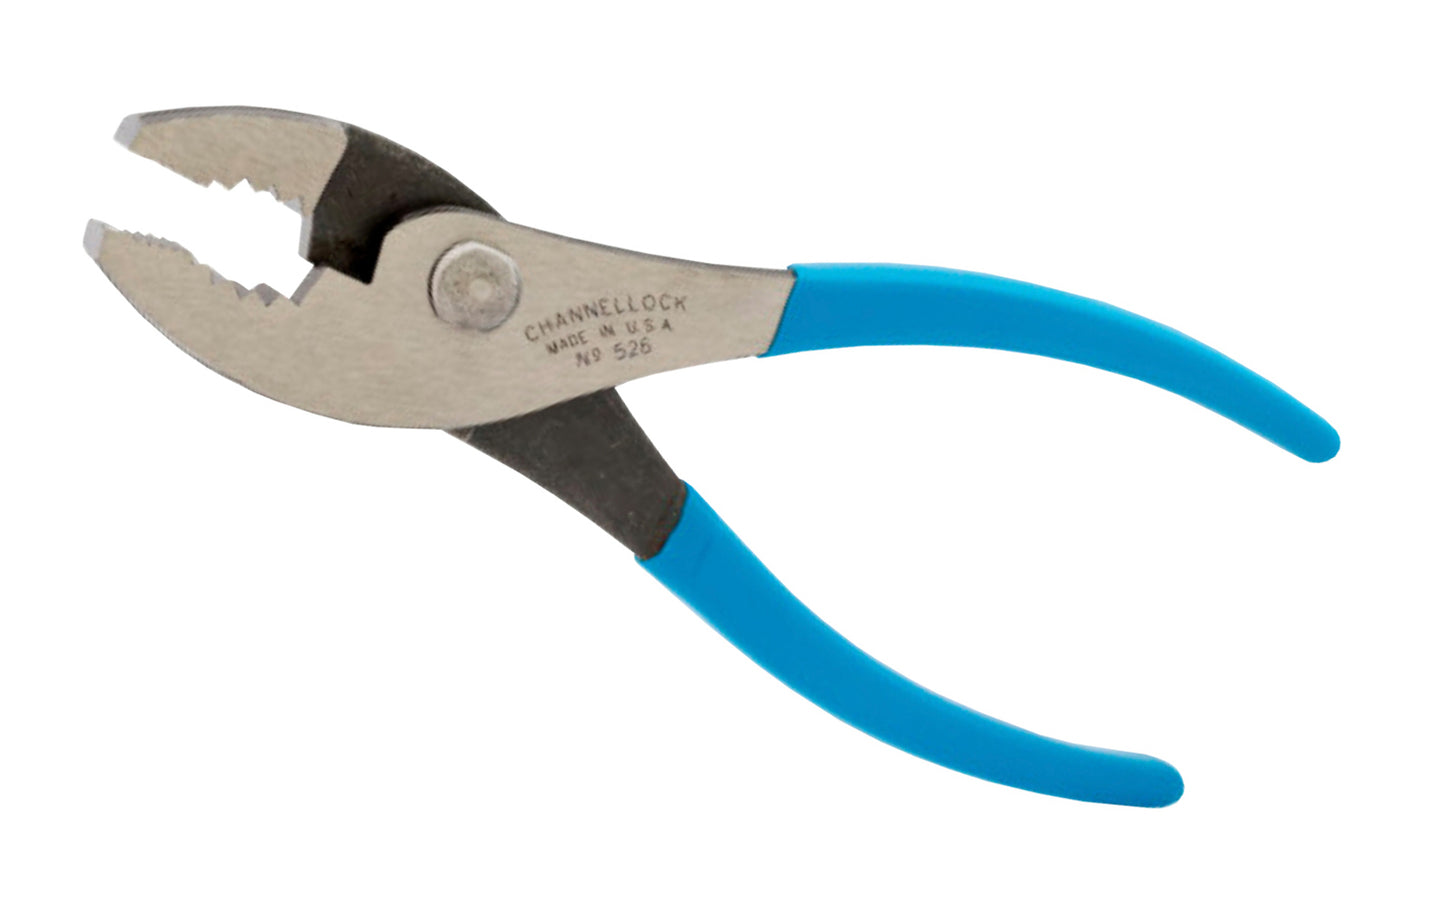 These 6-1/2" Channellock Slip Joint Pliers are versatile & easy to use. They feature a serrated jaw for a firm grip and an added wire cutting shear for soft wire. Channelock Slip Joint Pliers are made in USA and forged from high carbon U.S. steel that is specially coated for ultimate rust prevention.  Made in USA.